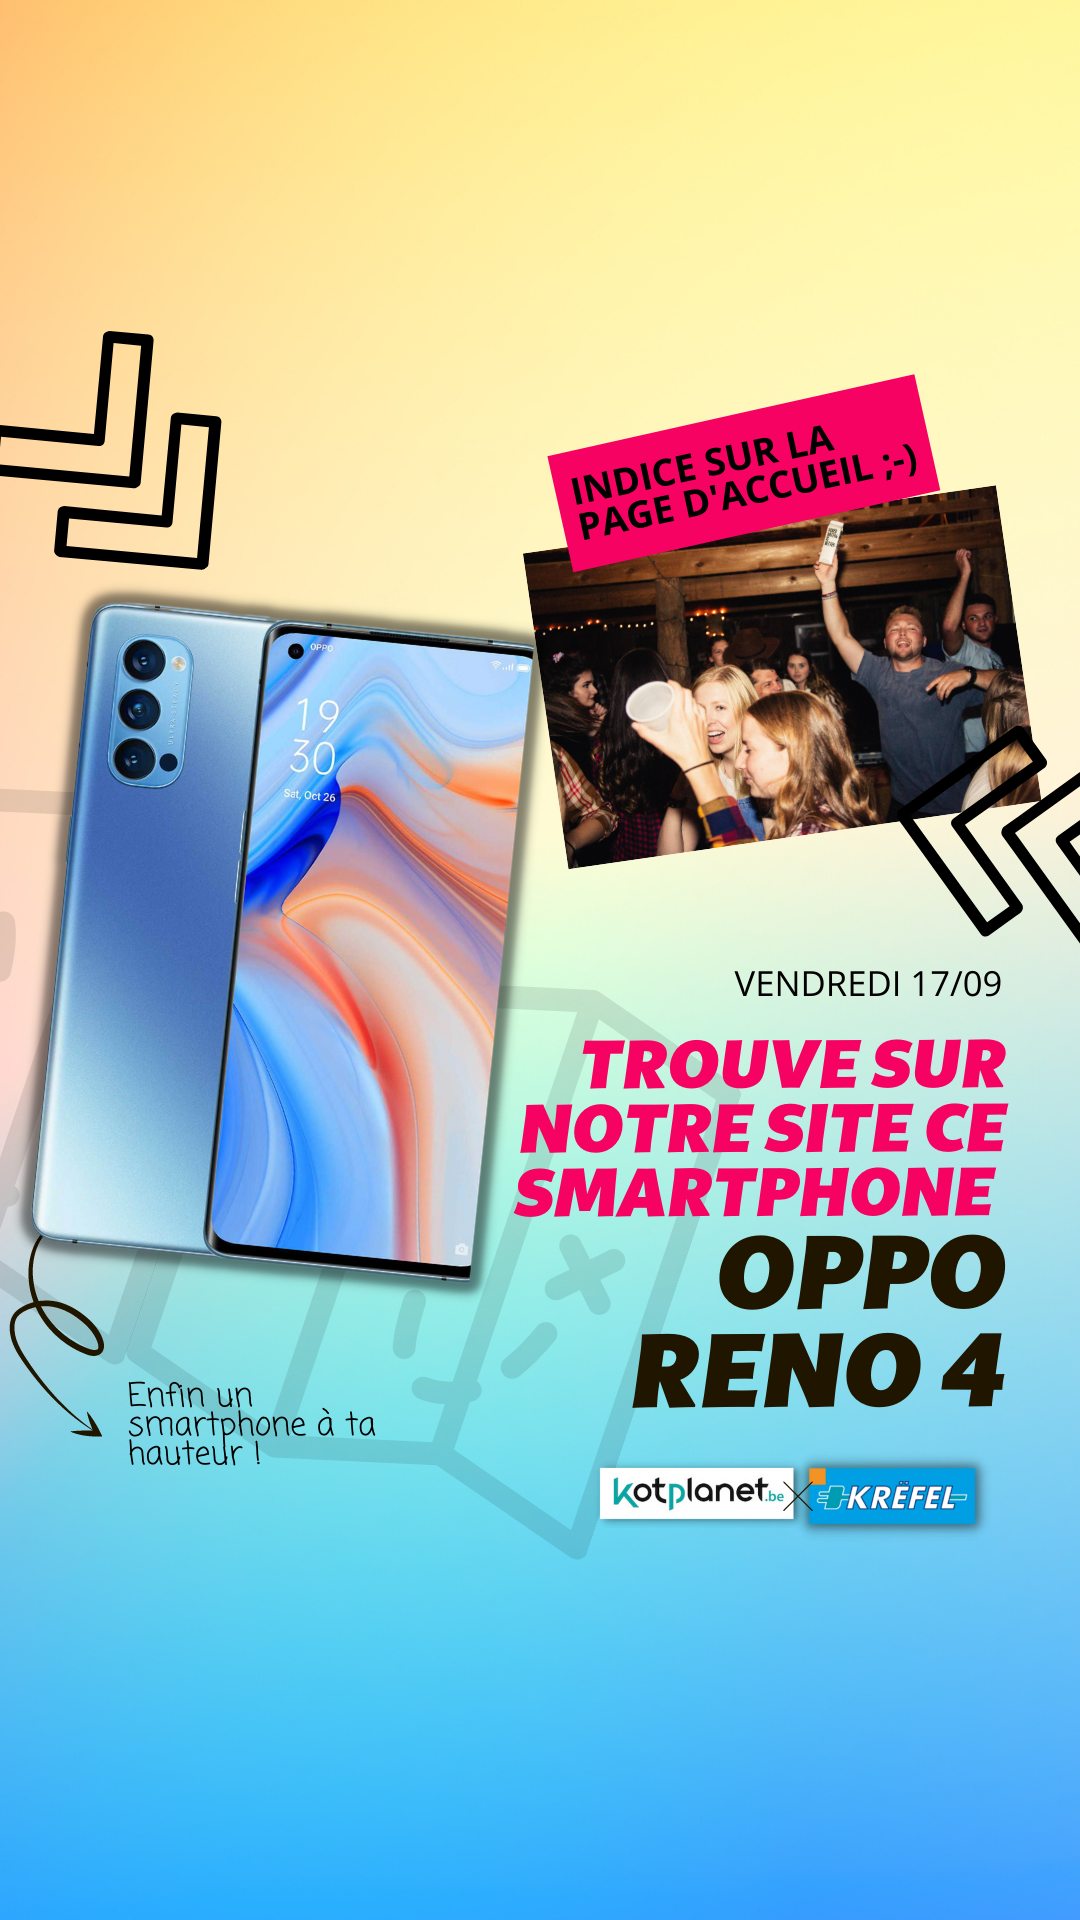 5.Story-oppo-indice